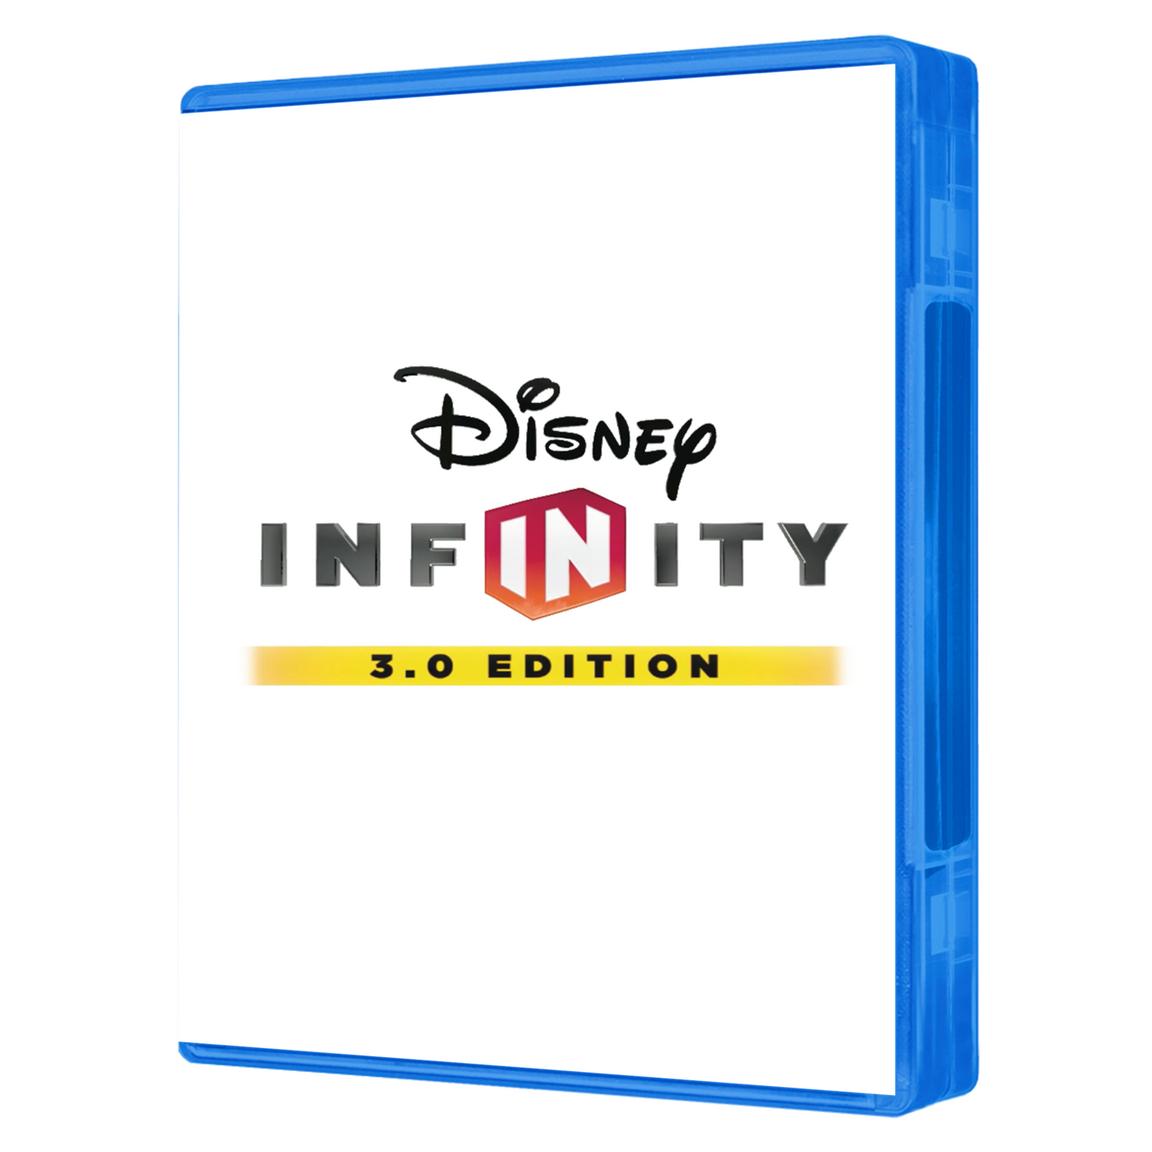 Disney Infinity 3.0 Edition - PlayStation 4, Pre-Owned